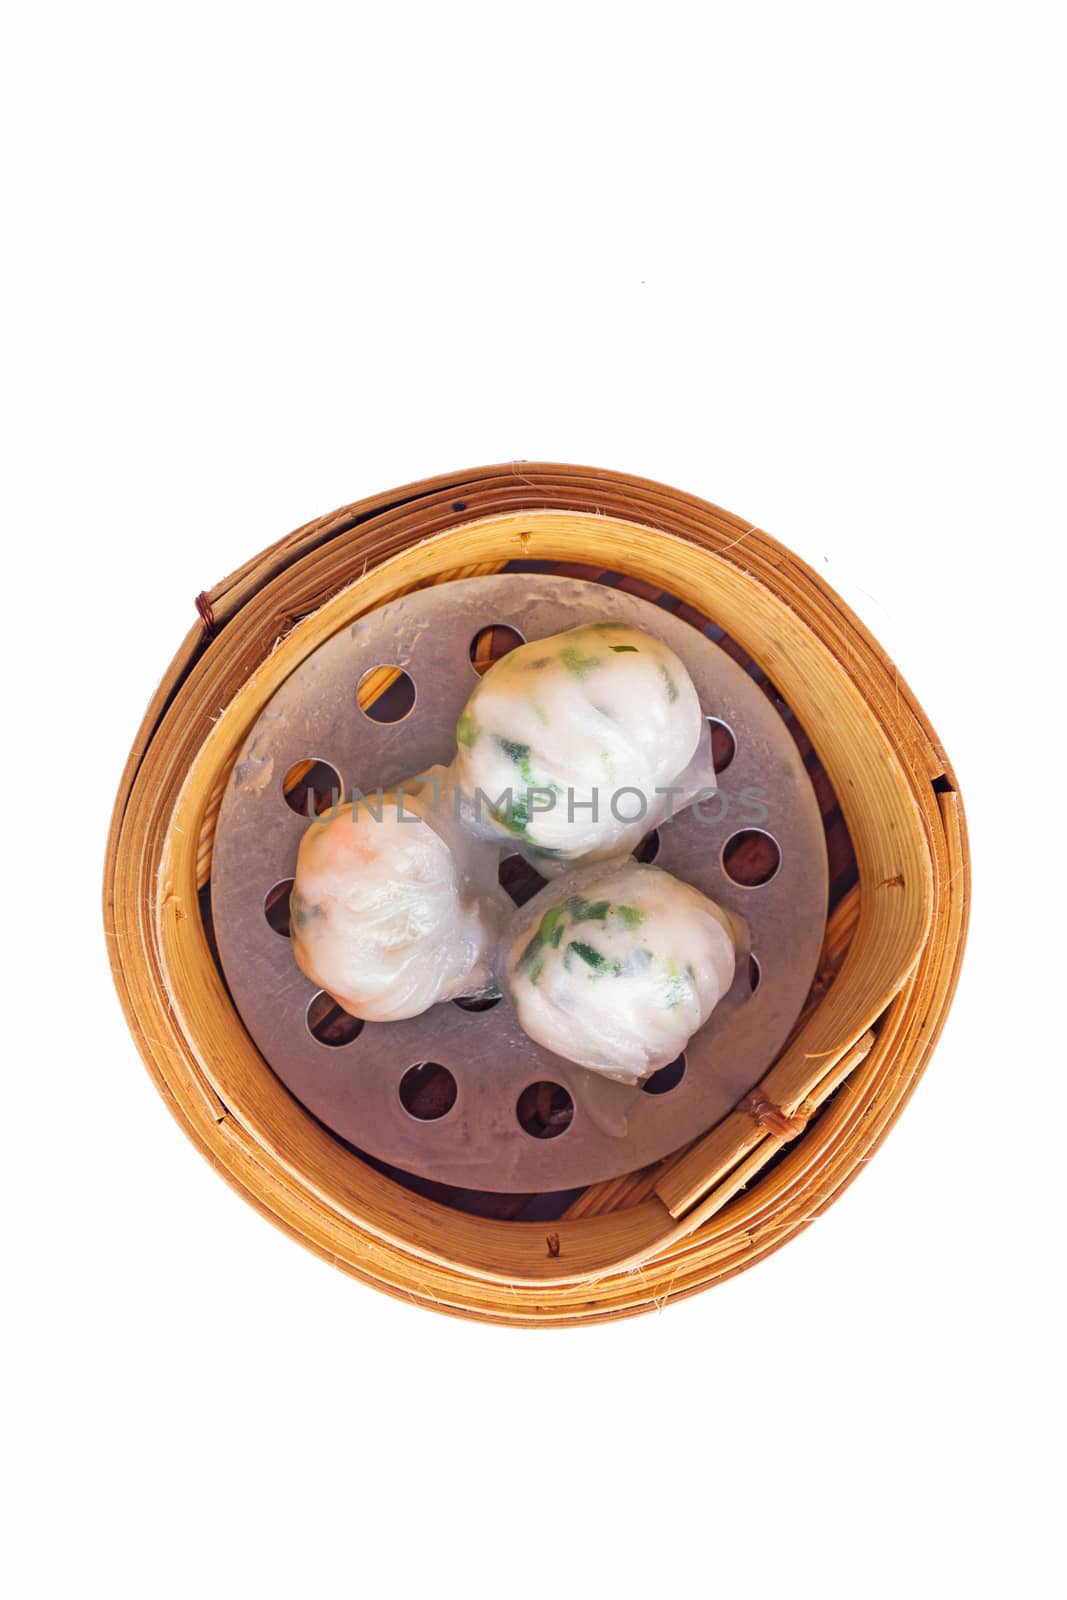 Dimsum in the steam basket . Chinese dimsum steamer prawn isolated on white background.